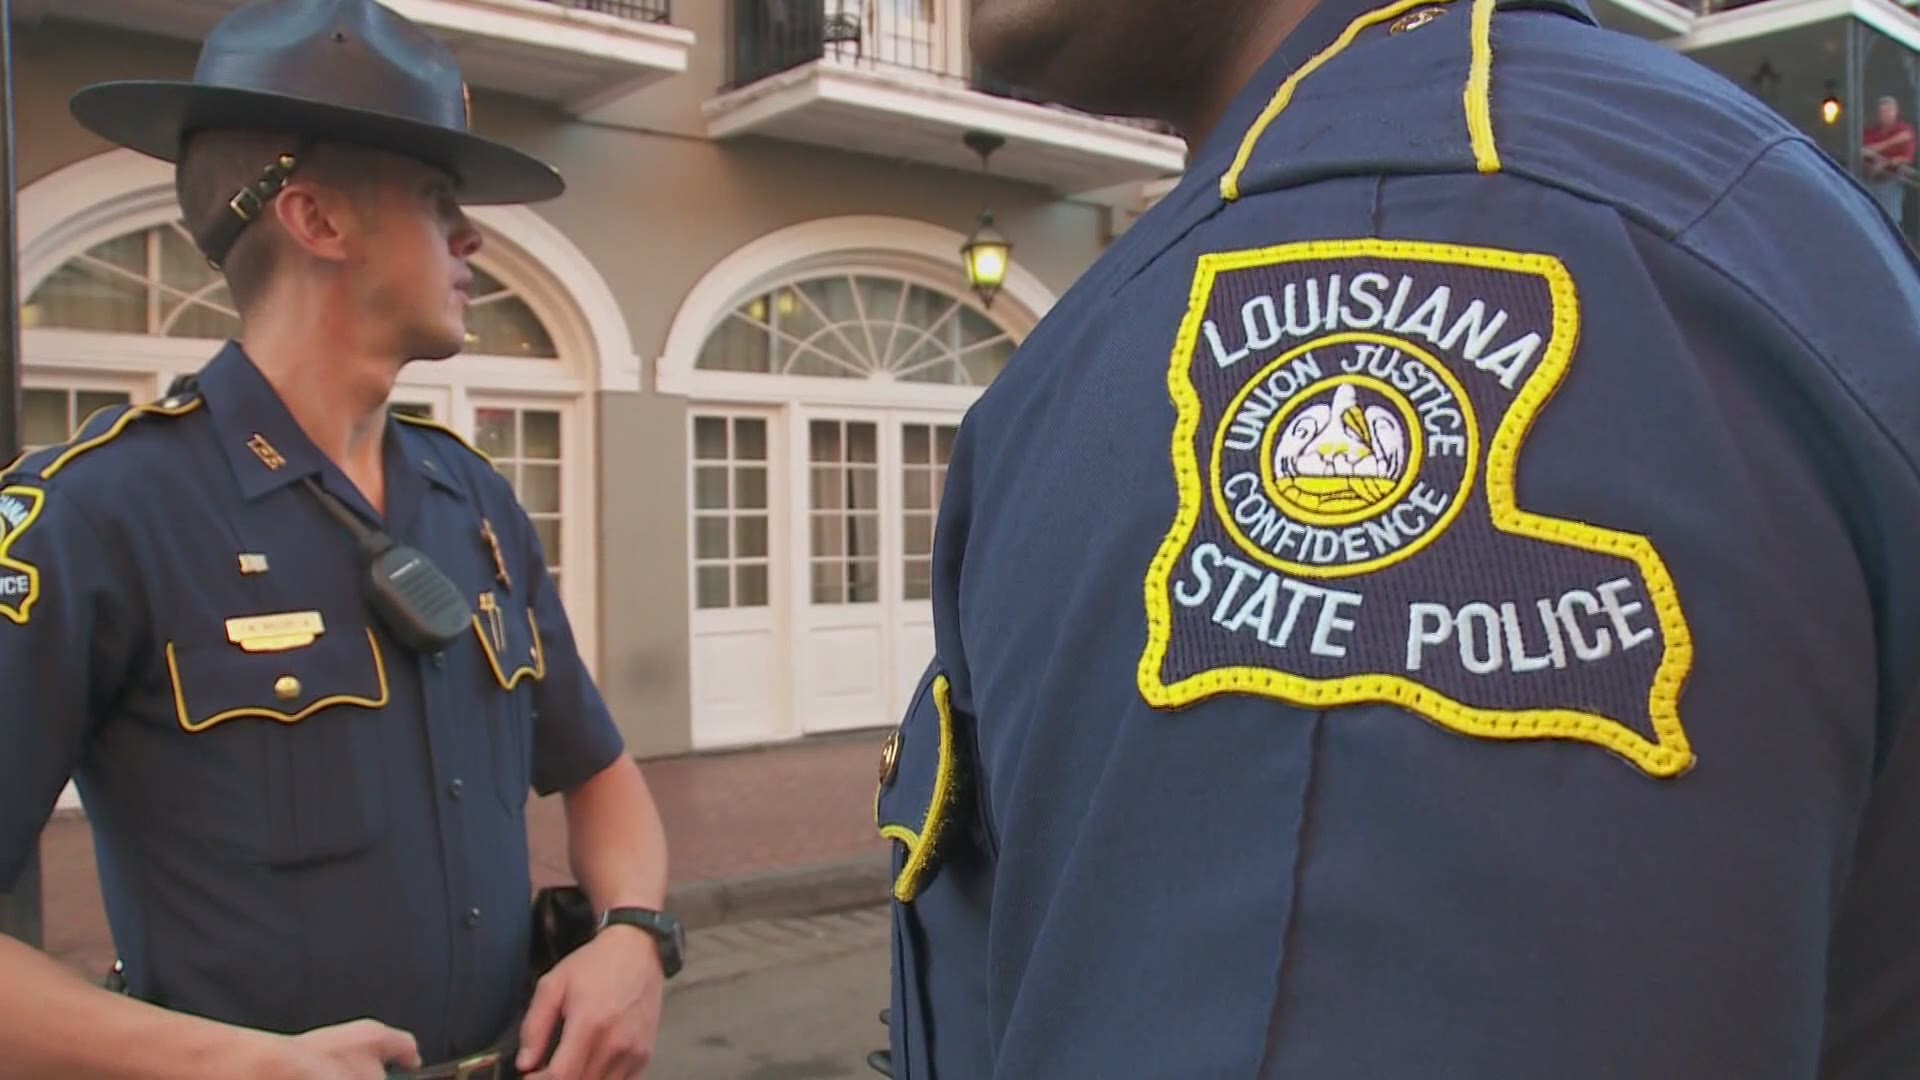 New Orleans Police and Louisiana State Police will have partnered up to decrease the violence in the city with Operation Golden Eagle.